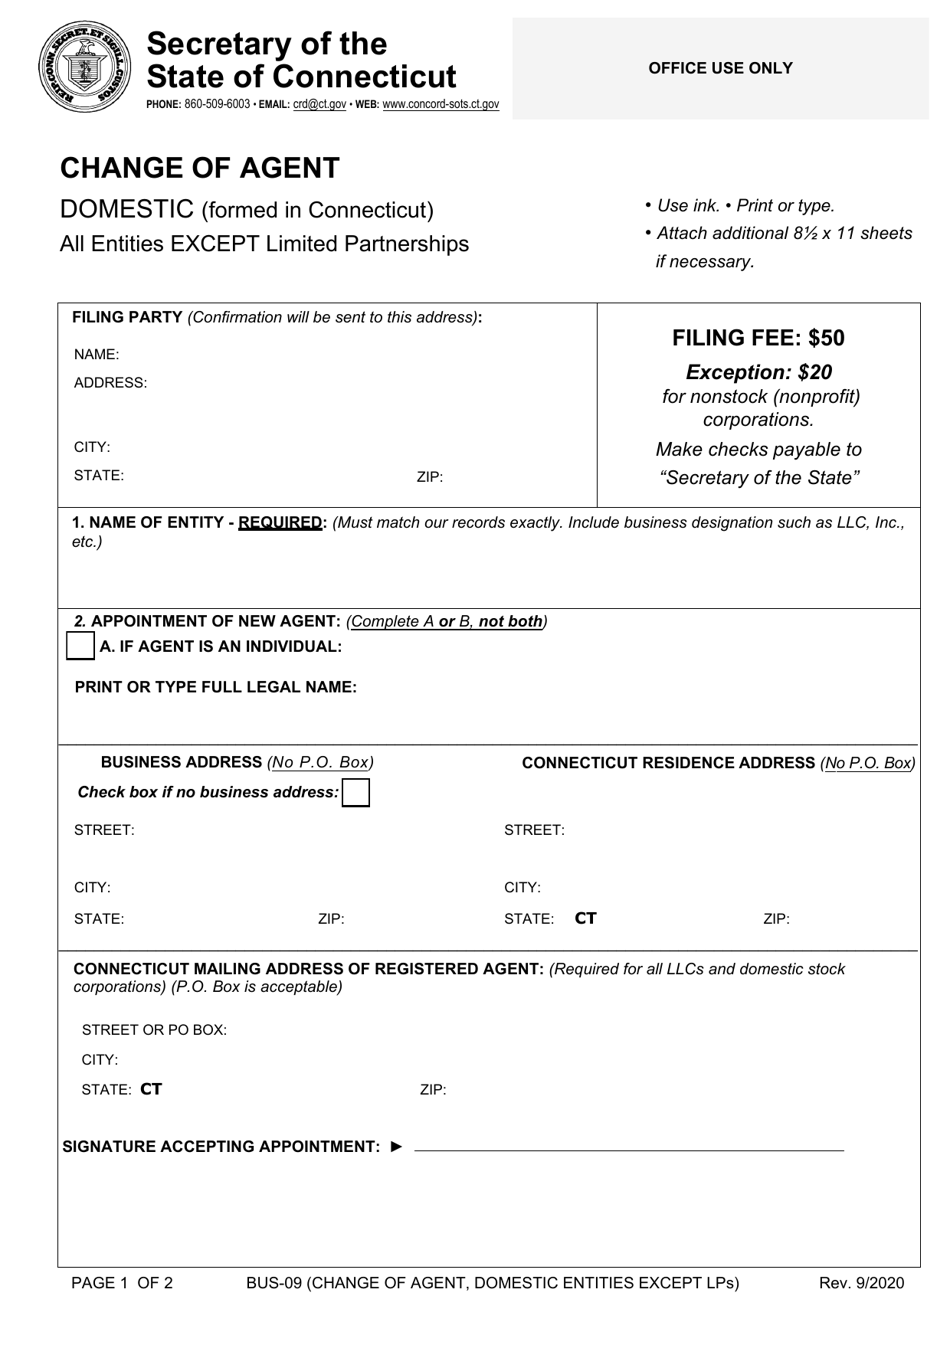 Form BUS-09 Change of Agent - Domestic (Formed in Connecticut) - All Entities Except Limited Partnerships - Connecticut, Page 1